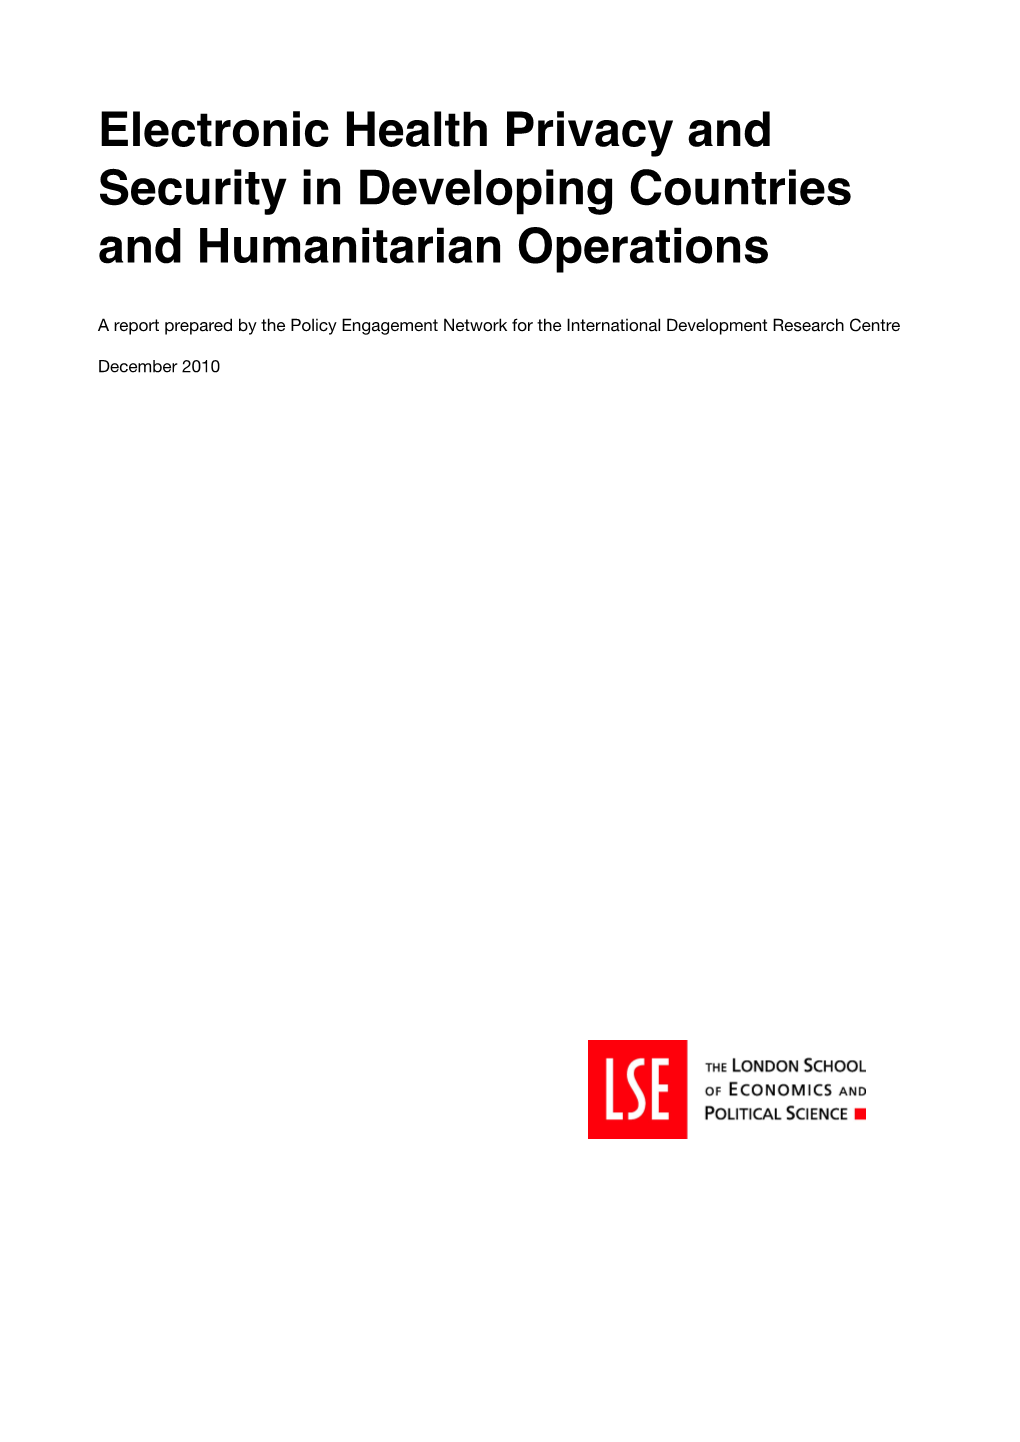 Electronic Health Privacy and Security in Developing Countries and Humanitarian Operations